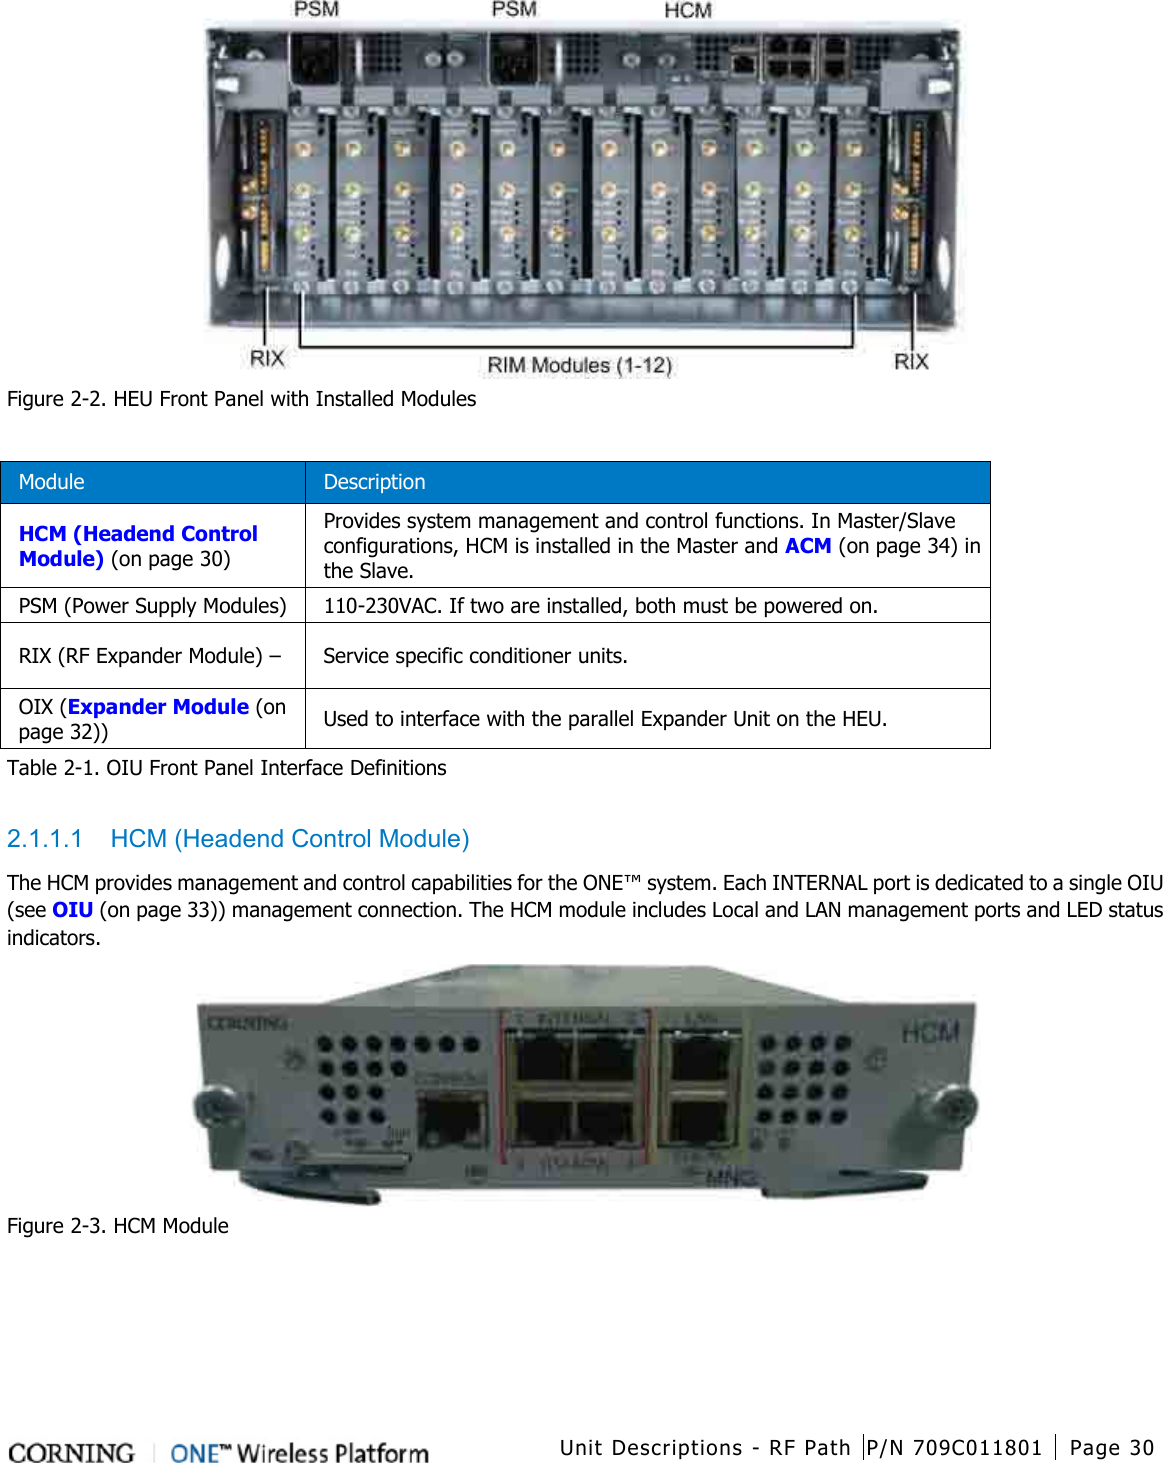  Unit Descriptions - RF Path P/N 709C011801 Page 30    Figure  2-2. HEU Front Panel with Installed Modules  Module Description HCM (Headend Control Module) (on page 30)   Provides system management and control functions. In Master/Slave configurations, HCM is installed in the Master and ACM (on page 34) in the Slave. PSM (Power Supply Modules) 110-230VAC. If two are installed, both must be powered on.   RIX (RF Expander Module) –    Service specific conditioner units. OIX (Expander Module (on page 32)) Used to interface with the parallel Expander Unit on the HEU.   Table  2-1. OIU Front Panel Interface Definitions  2.1.1.1  HCM (Headend Control Module) The HCM provides management and control capabilities for the ONE™ system. Each INTERNAL port is dedicated to a single OIU (see OIU (on page 33)) management connection. The HCM module includes Local and LAN management ports and LED status indicators.  Figure  2-3. HCM Module    